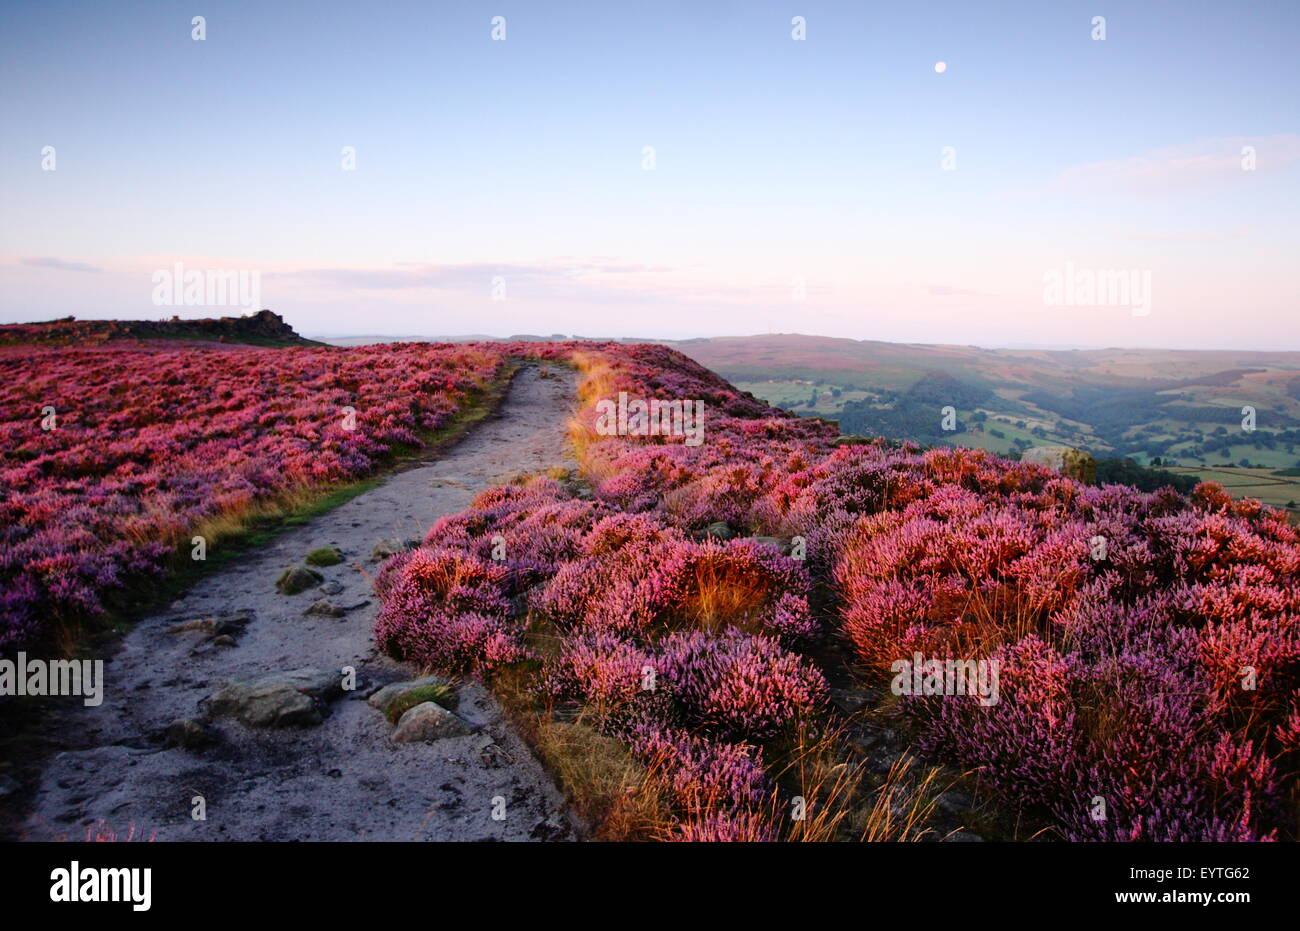 Blossoming Heather (calluna vulgaris) fringes a path on Hathersage Moor in the Peak District National Park, Yorkshire England UK Stock Photo